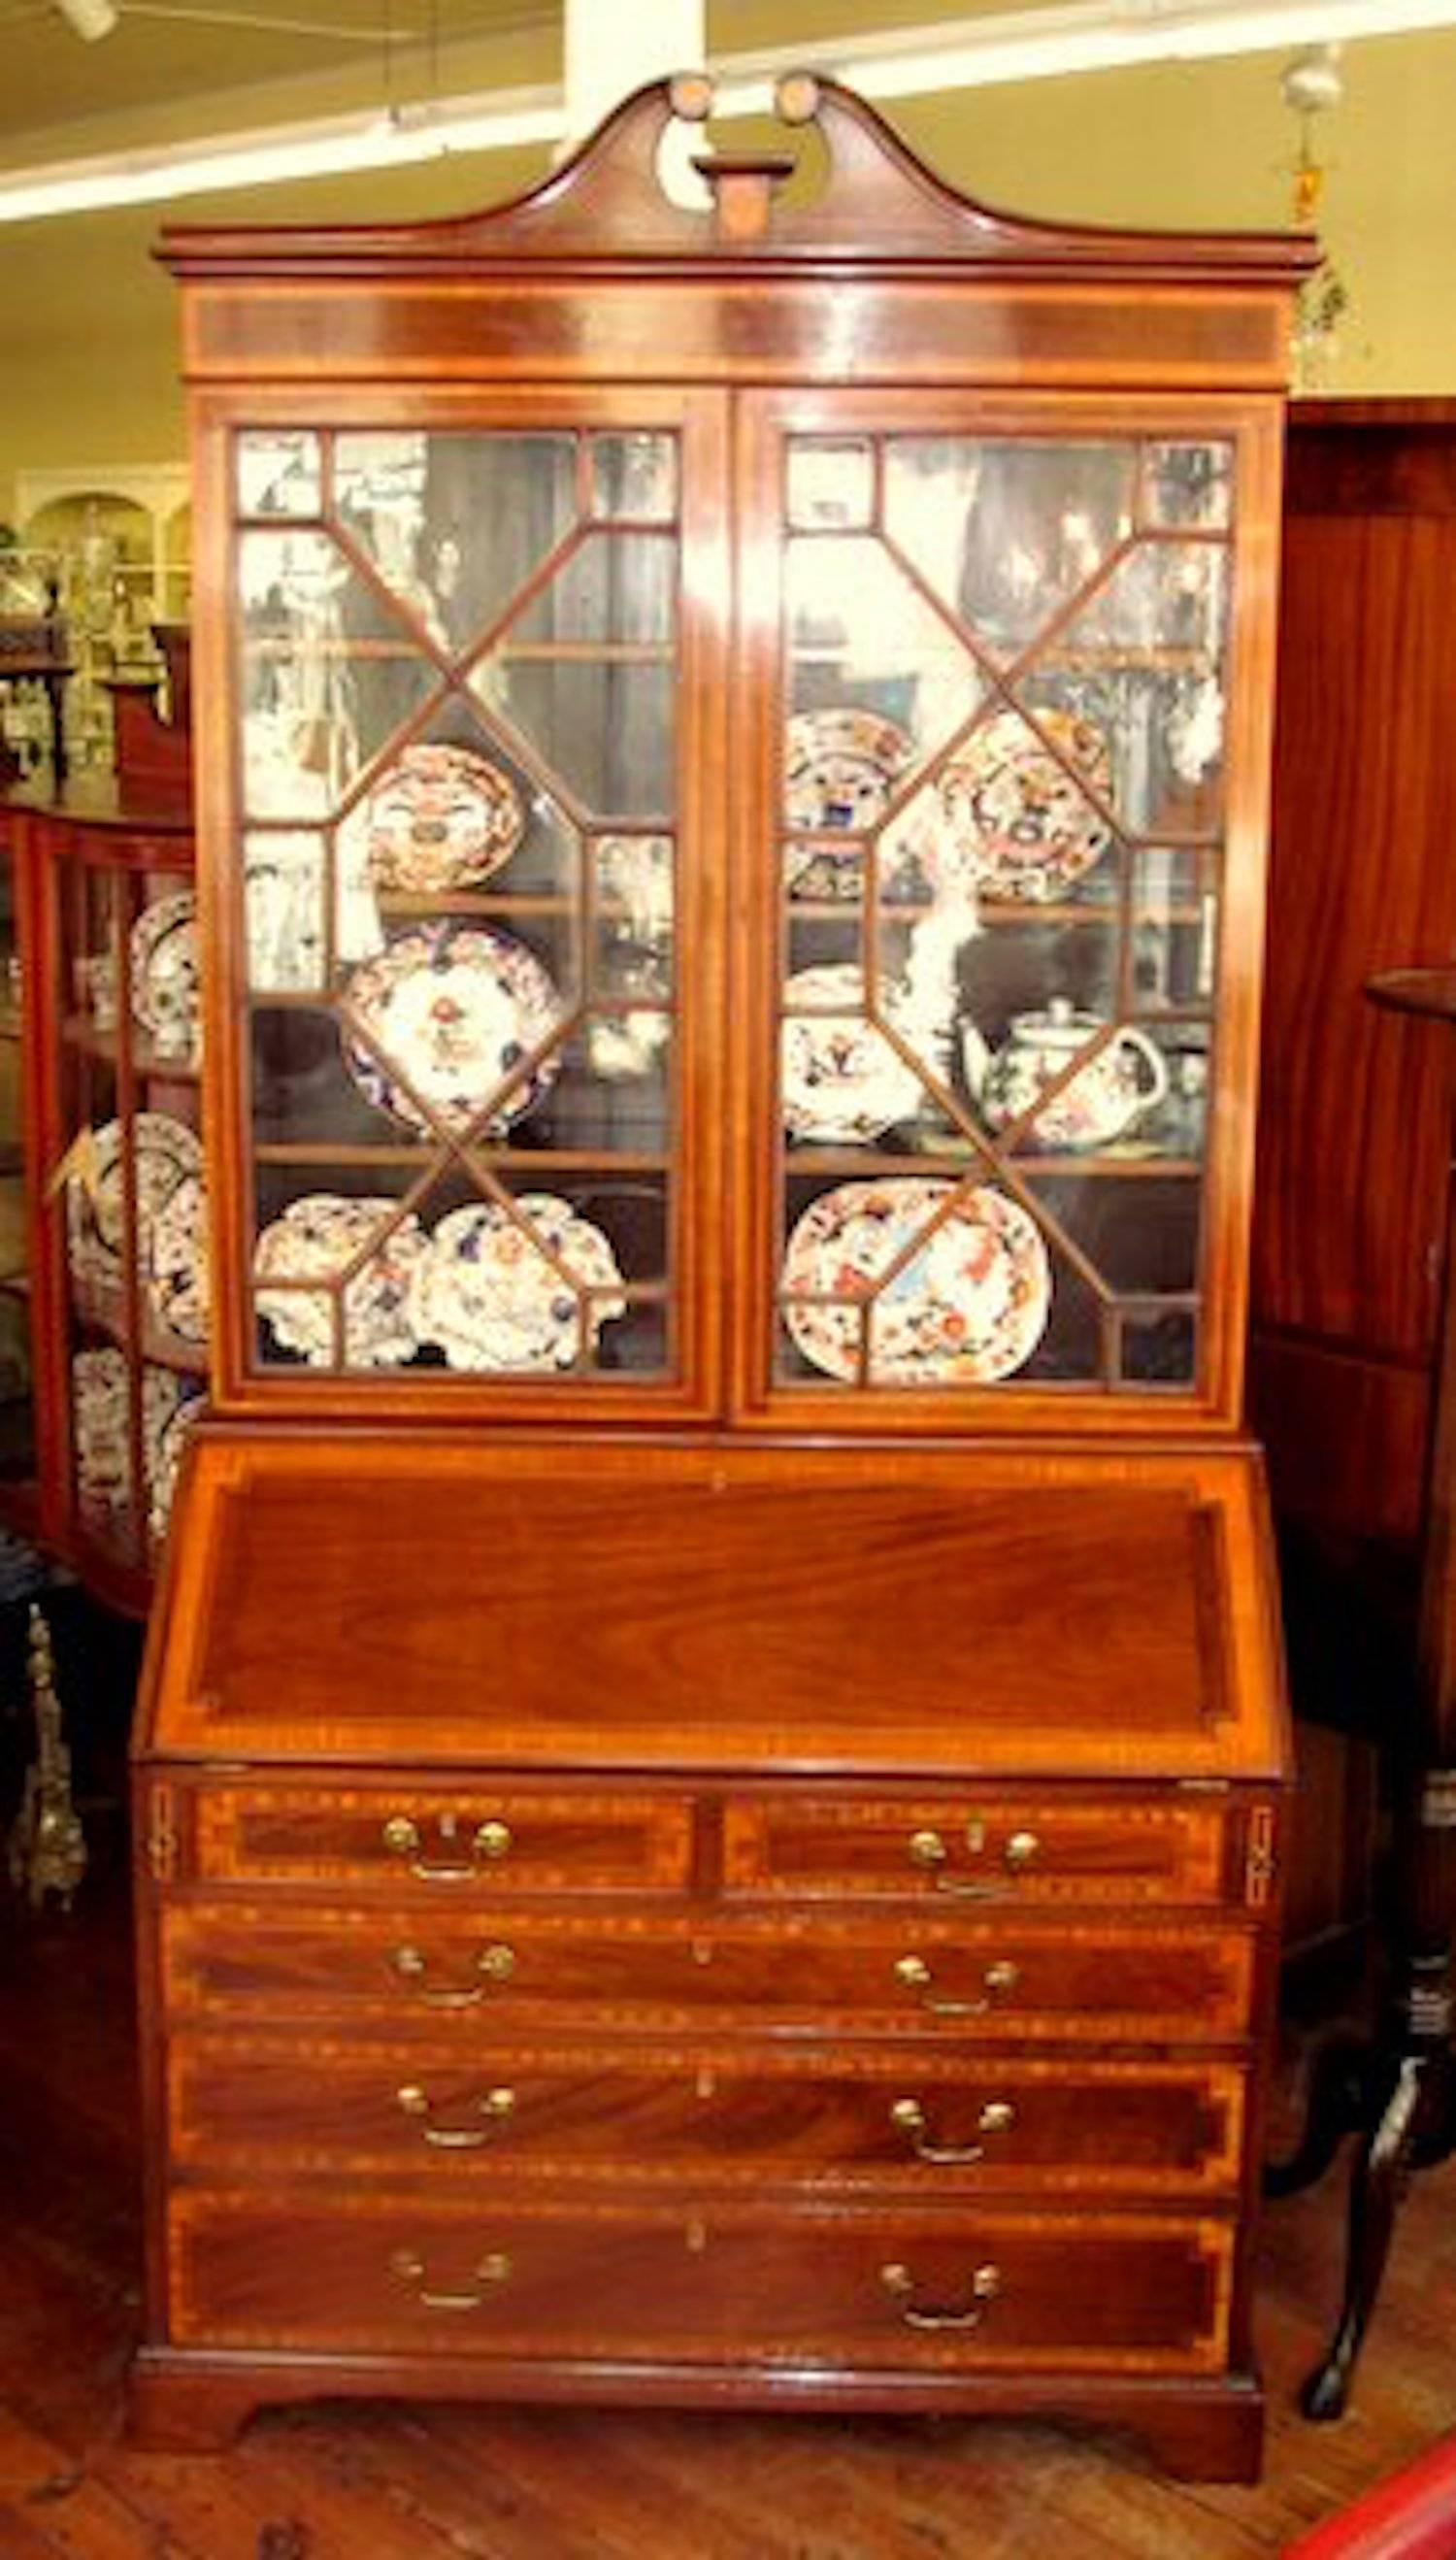 Fabulous quality antique English George IV satinwood inlaid mahogany Chippendale style Bureau Bookcase/Secretary with gorgeous fitted interior having "secret" document slides on either side of the central prospect door. Original swan-neck